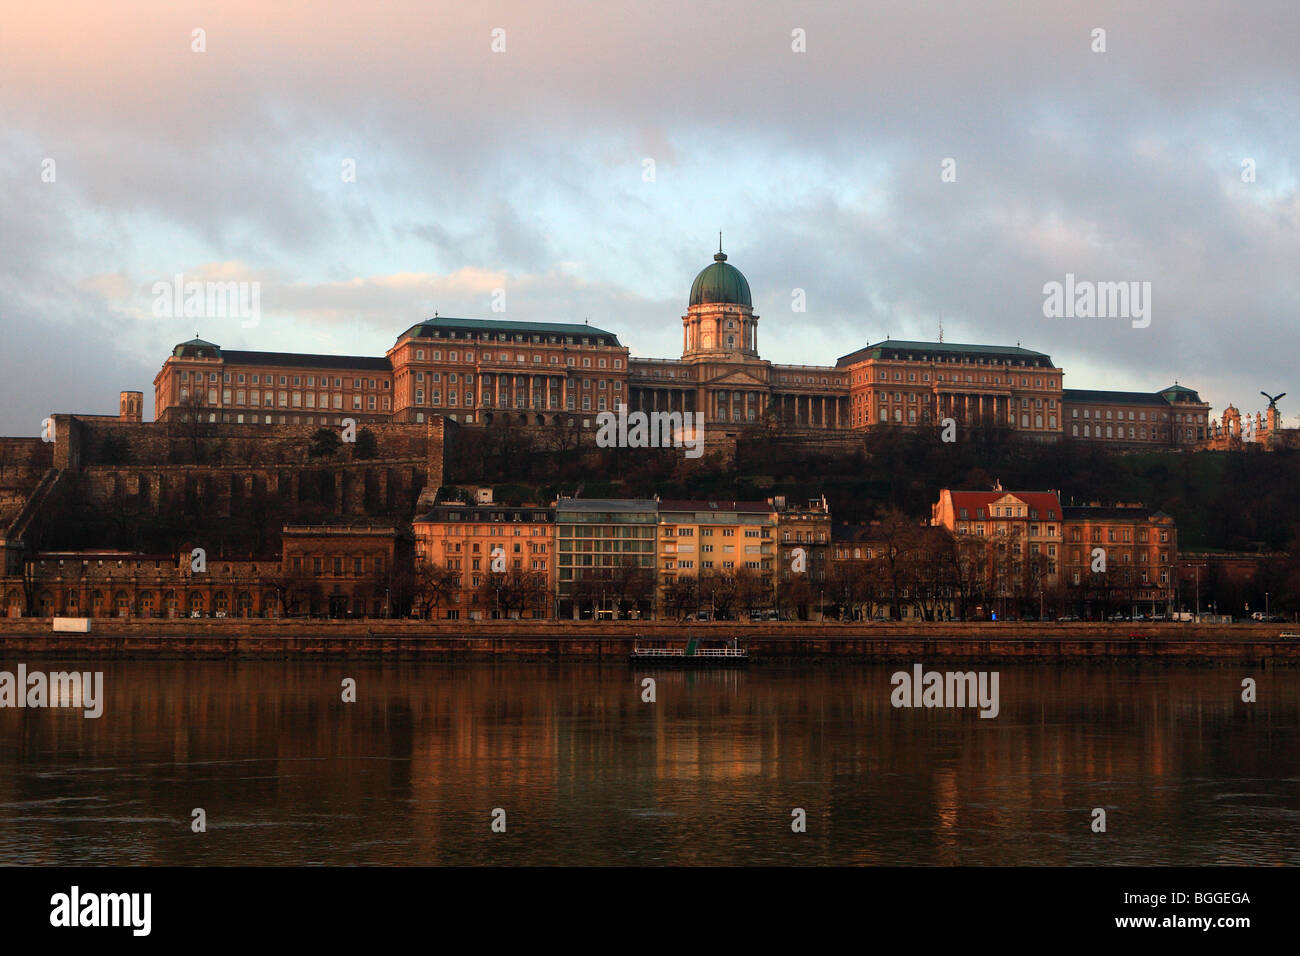 Dec 31, 2009 - Budapest, Hungary - The Royal Palace on Castle Hill. Stock Photo